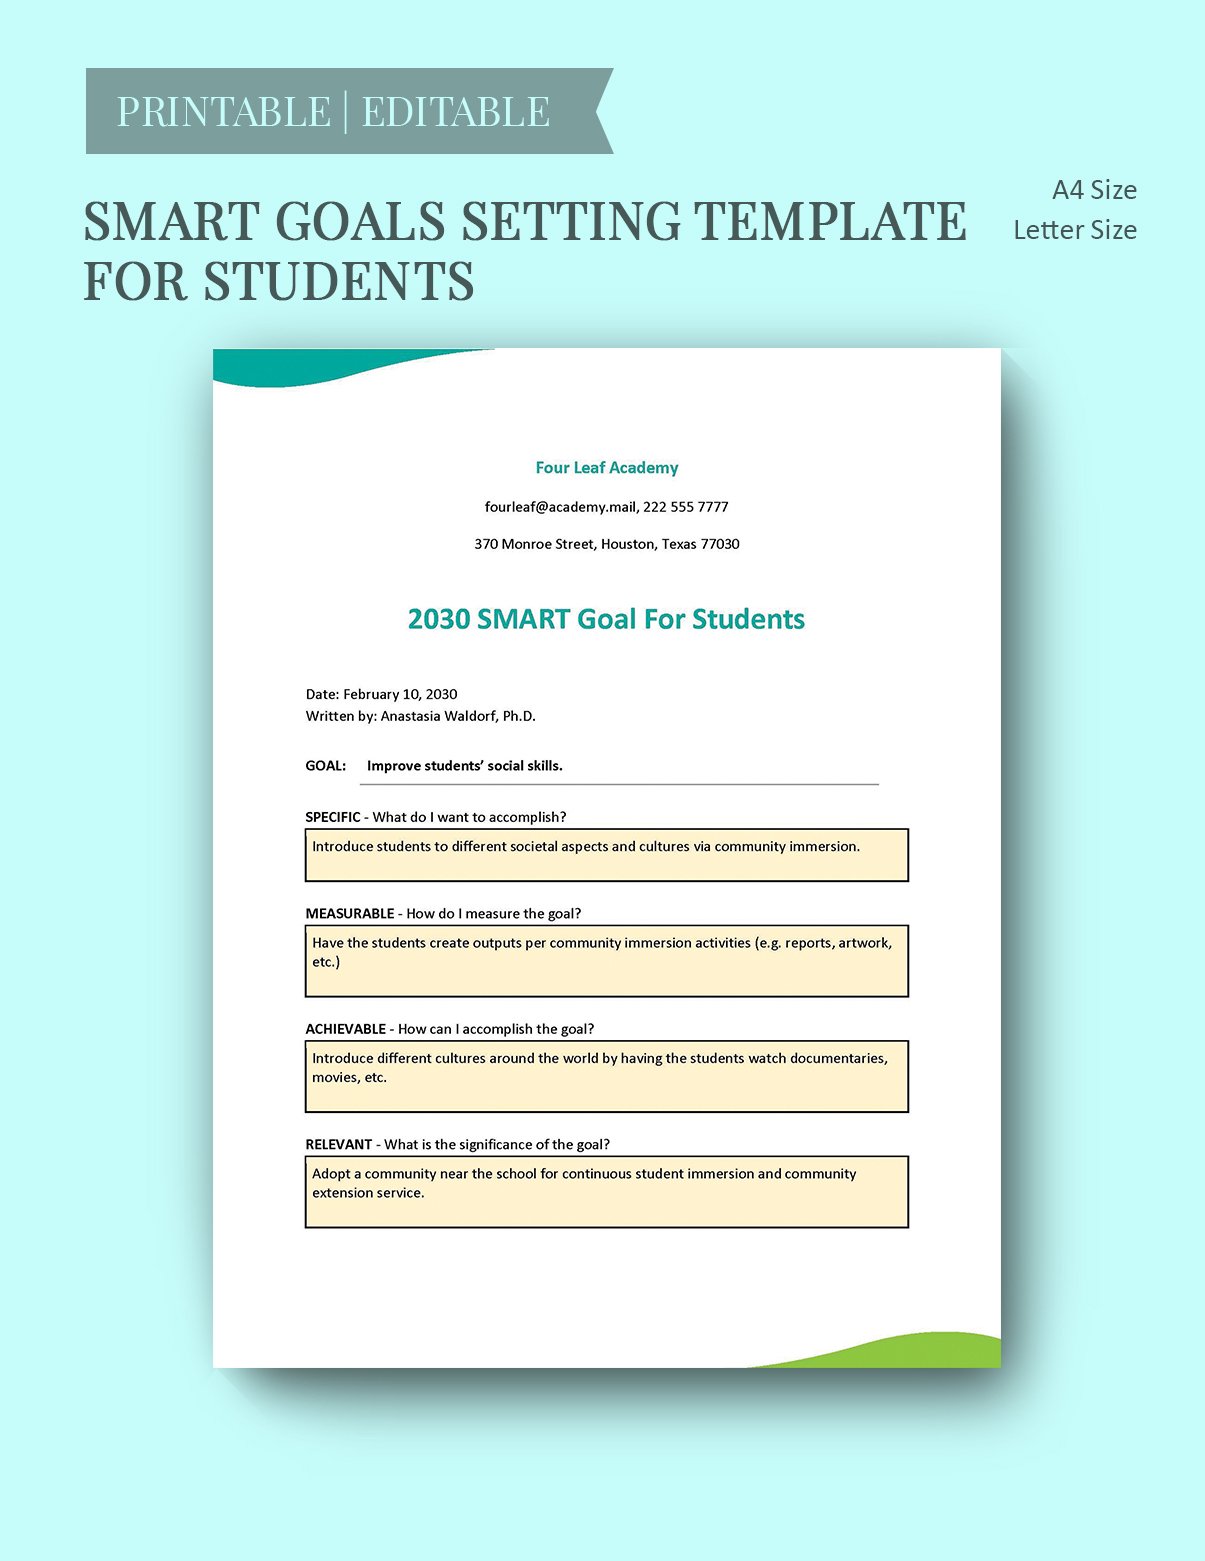 Smart Goals Setting Template for Students